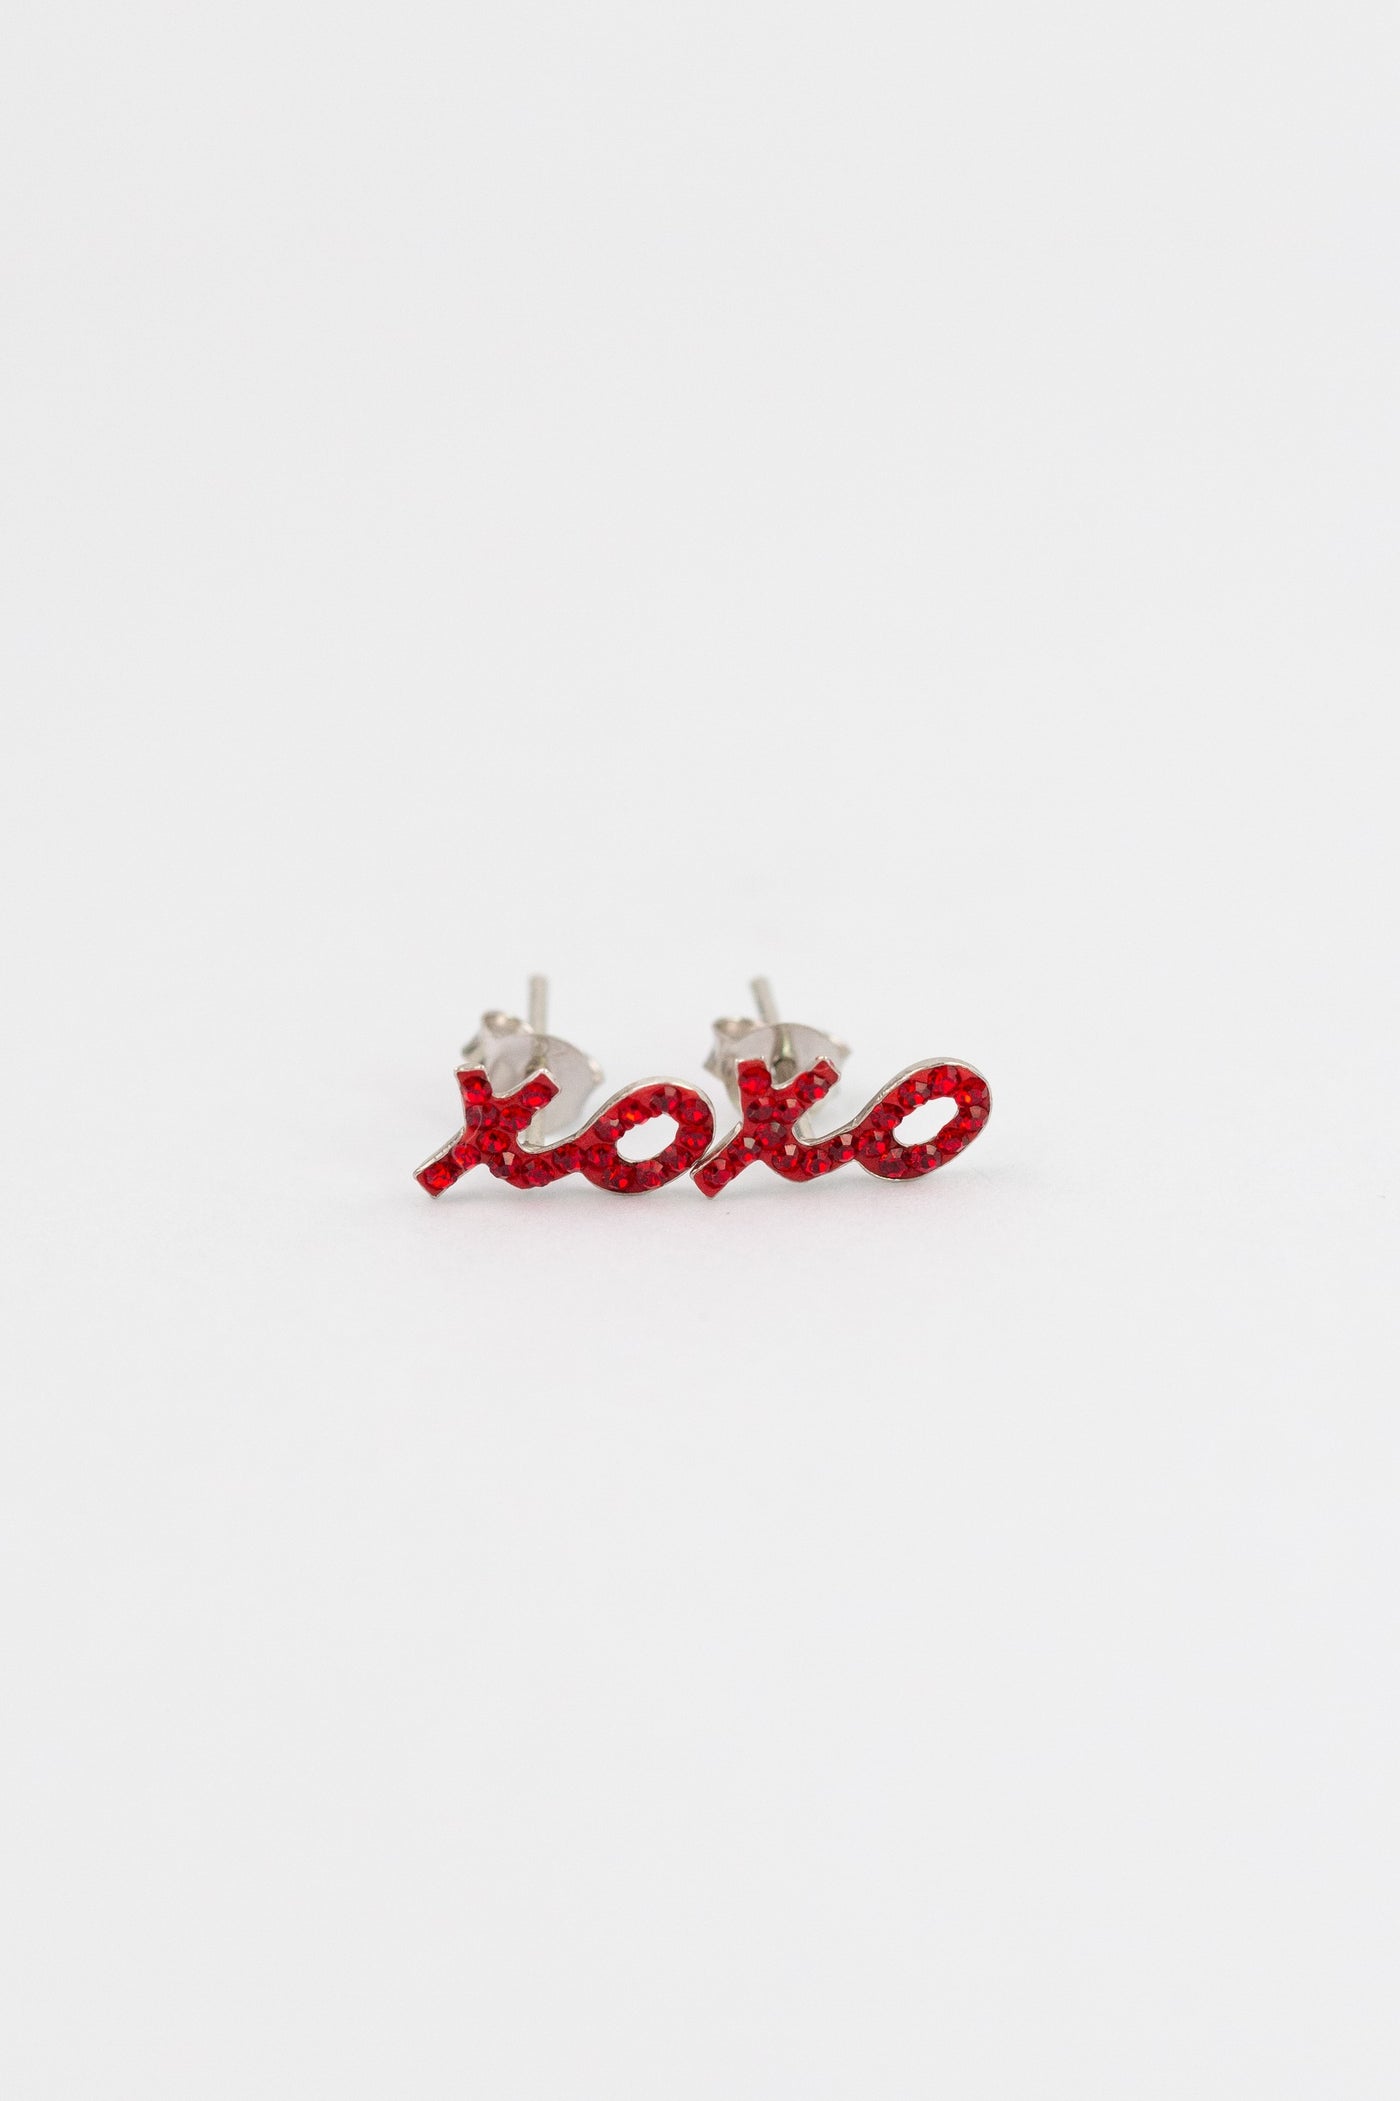 XOXO Sterling Silver Stud Earrings in Red | Annie and Sisters | sister stud earrings, for kids, children's jewelry, kid's jewelry, best friend